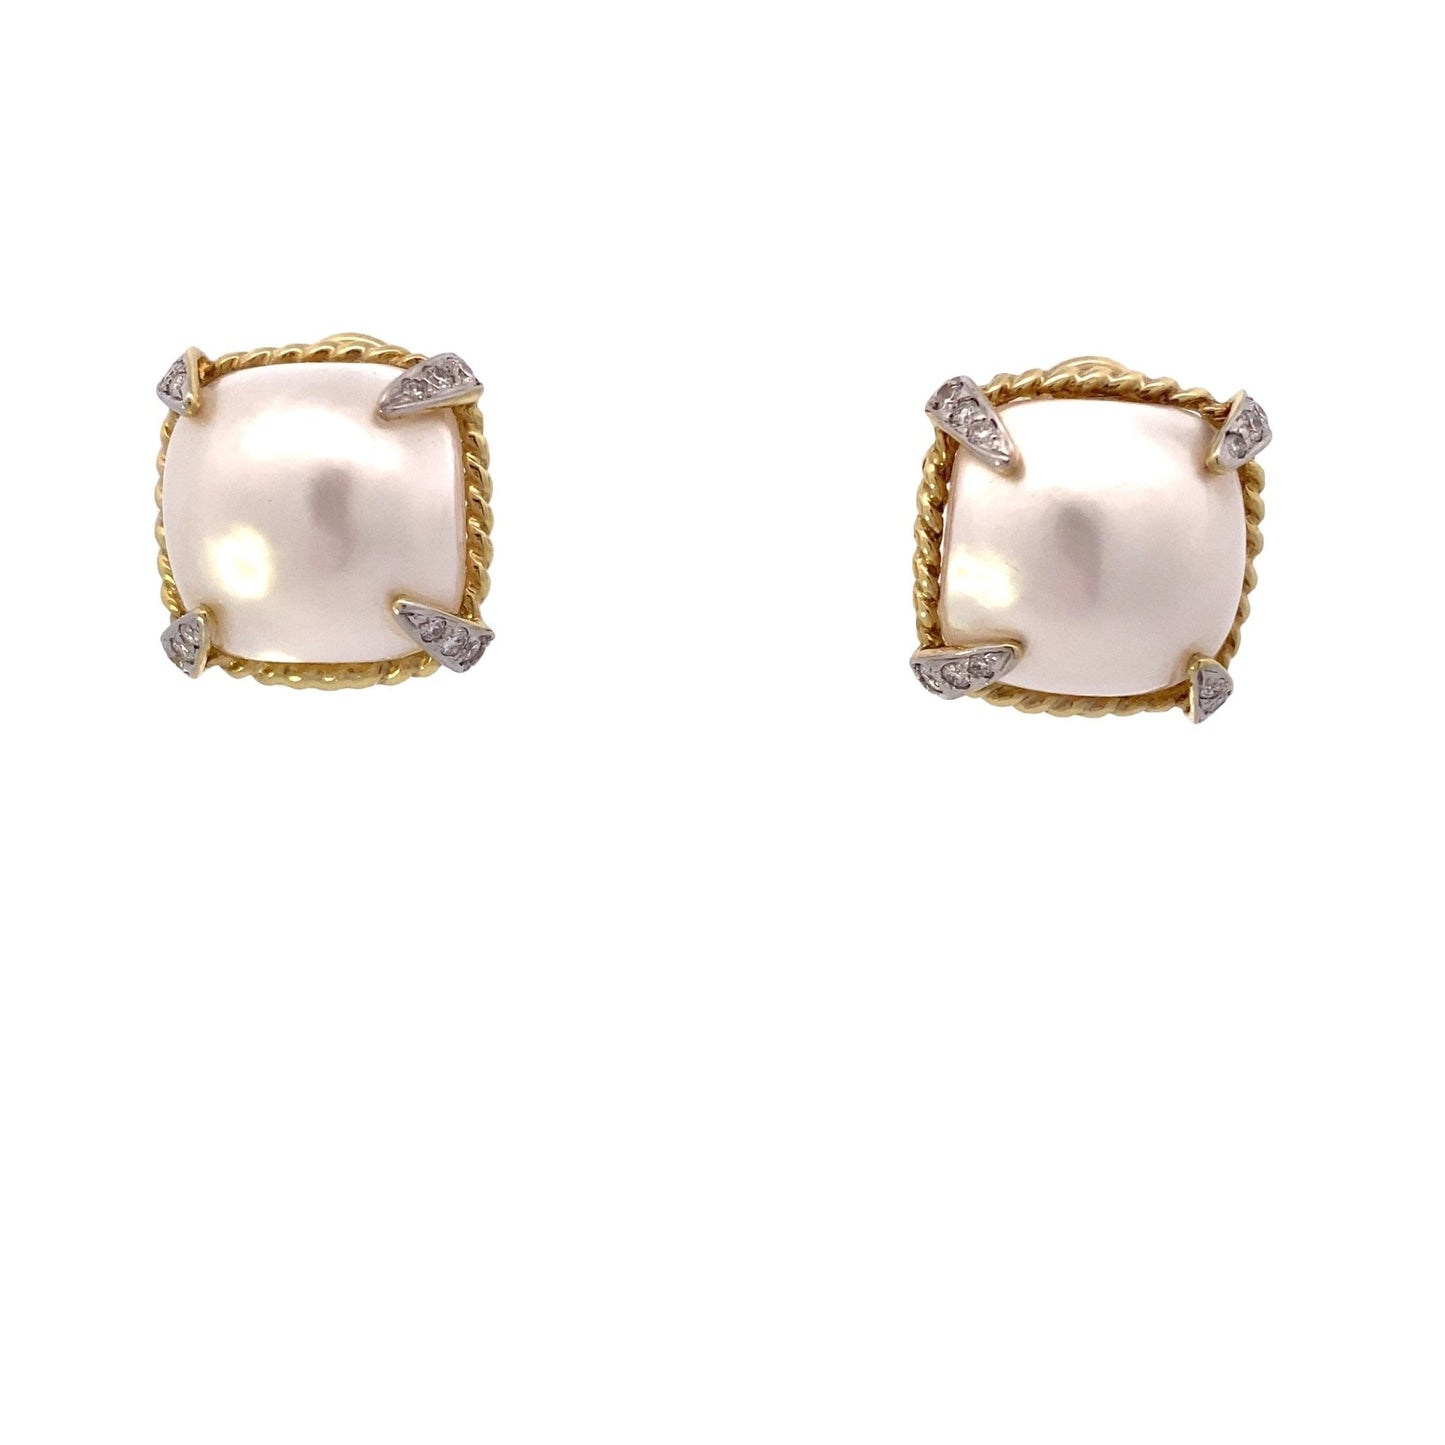 Earrings-Pearl and diamond earrings with rope detail - Gaines Jewelers